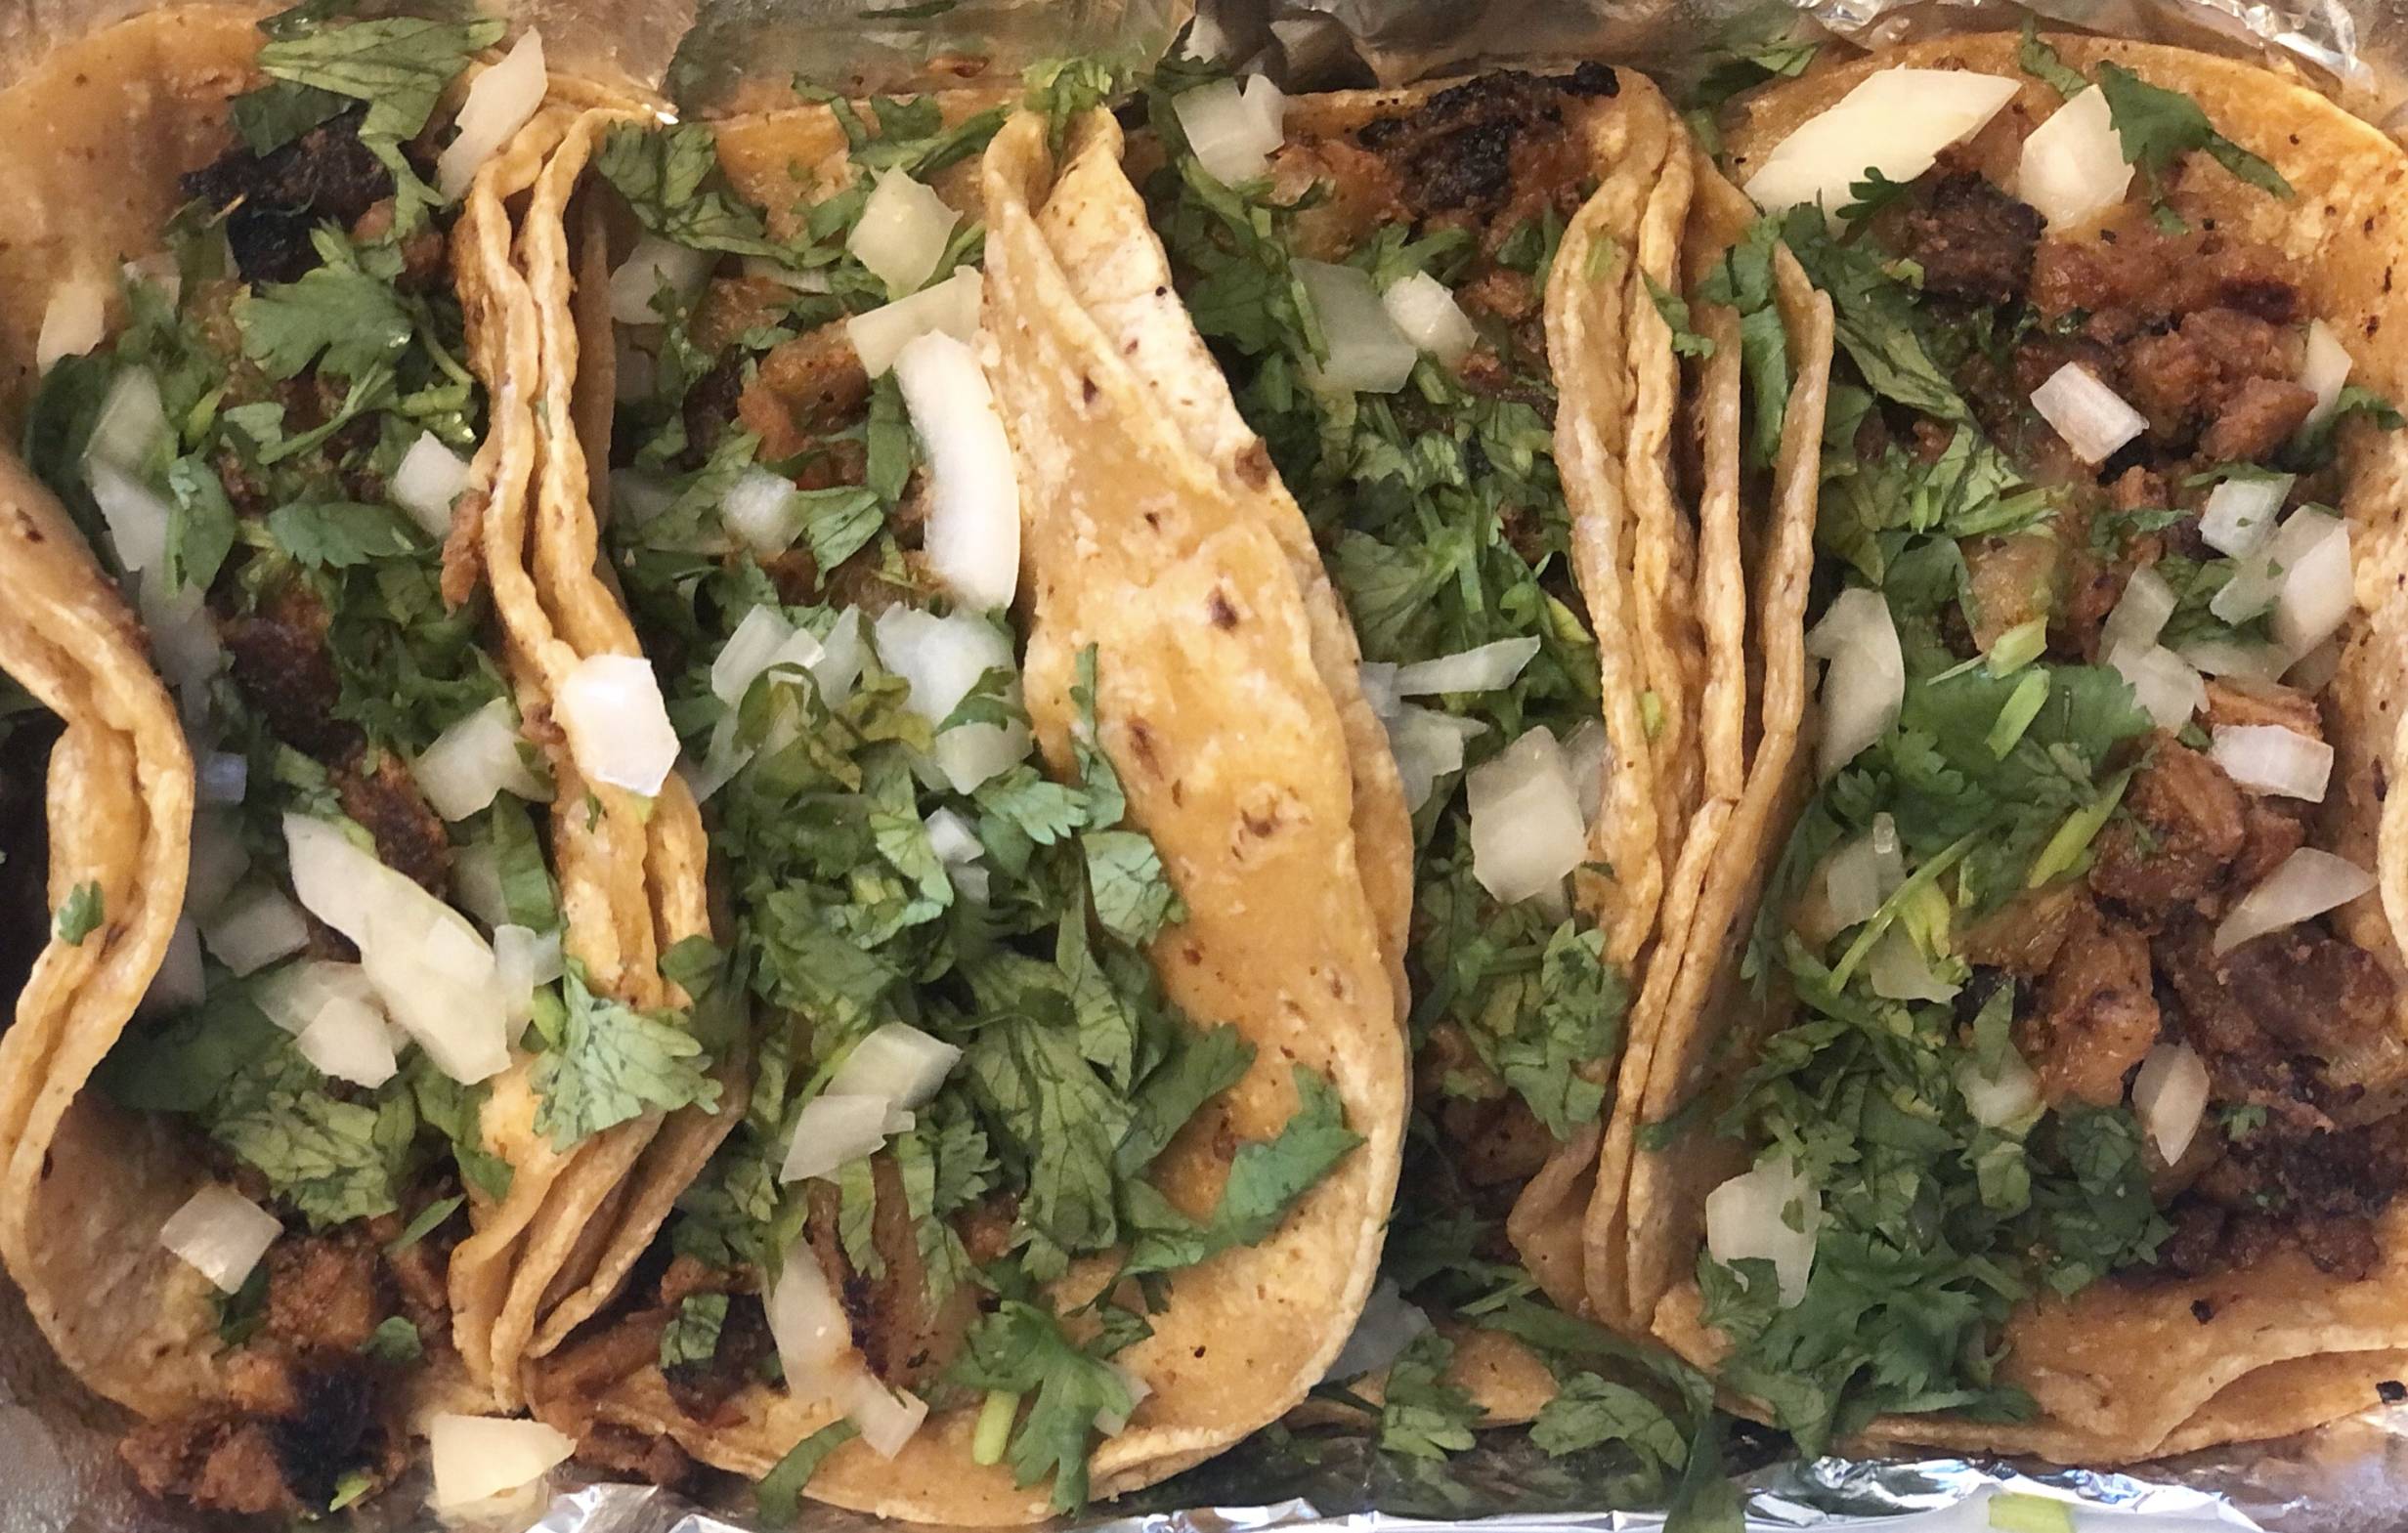 Four al pastor tacos on corn tortillas served Mexican style with lots of cilantro and raw white onion on each. Photo by Alyssa Buckley.